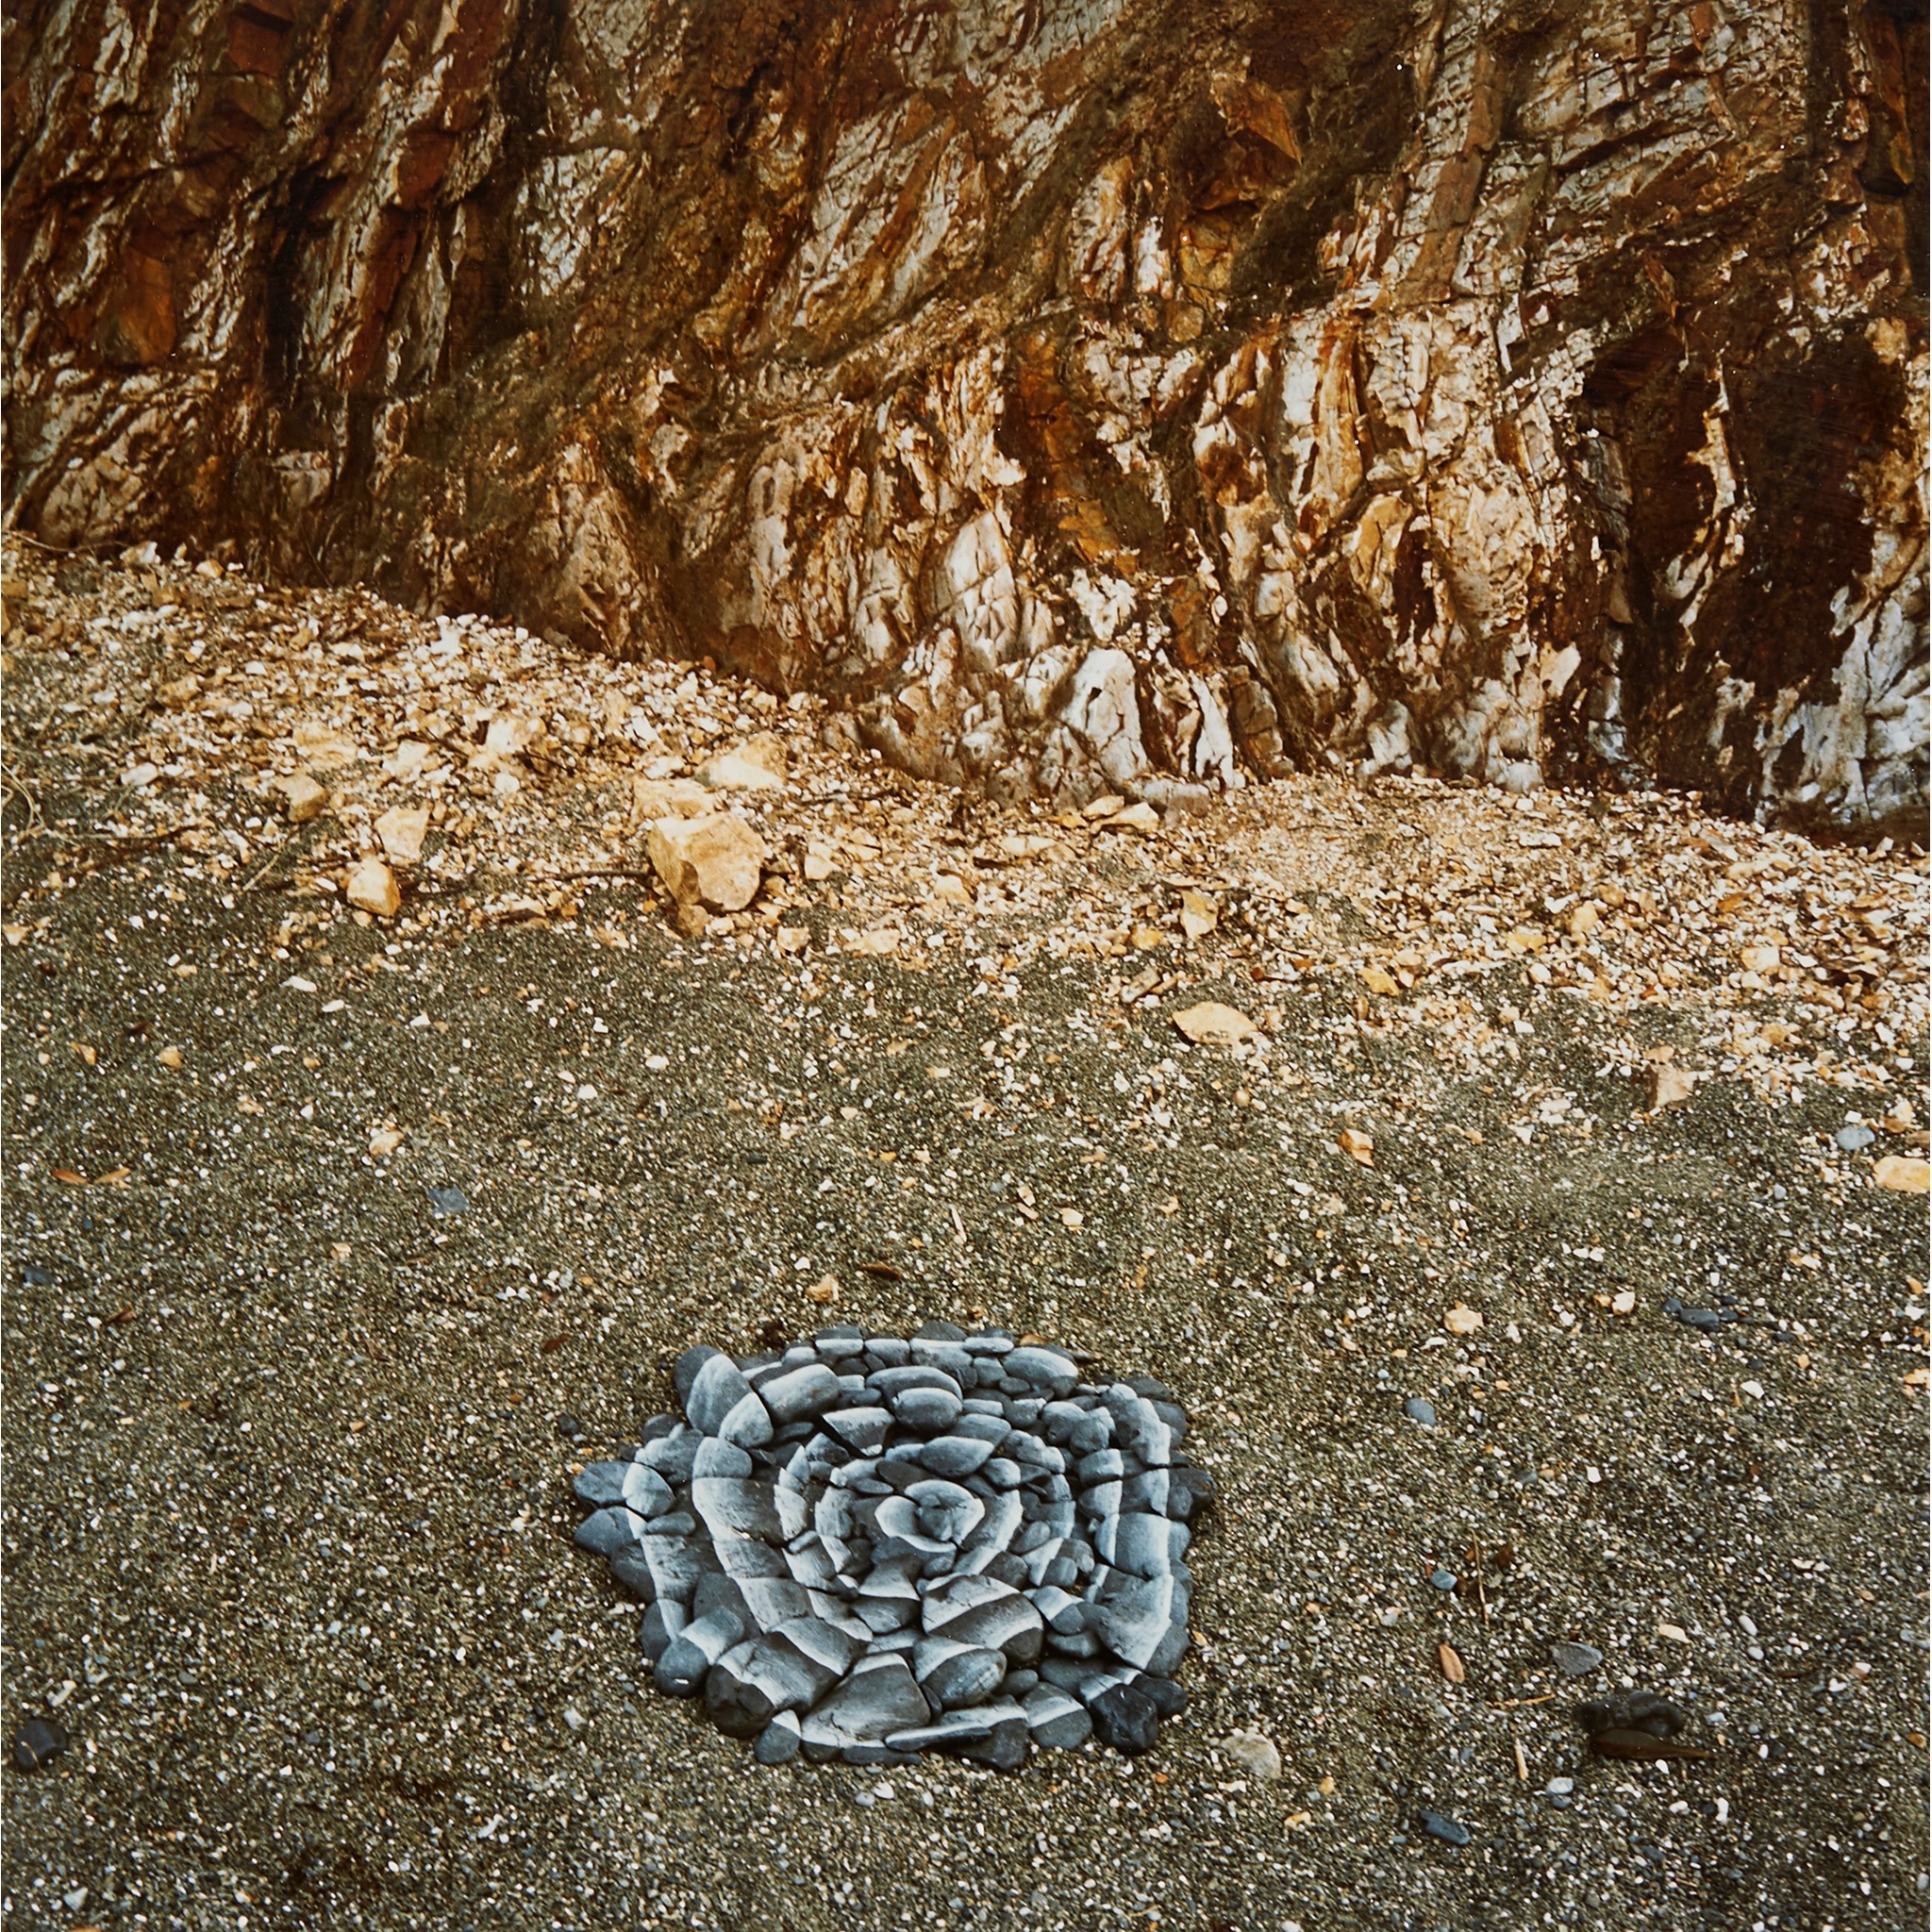 STARTED CLIMBING THE MOUNTAIN . . . by Andy Goldsworthy, 1987